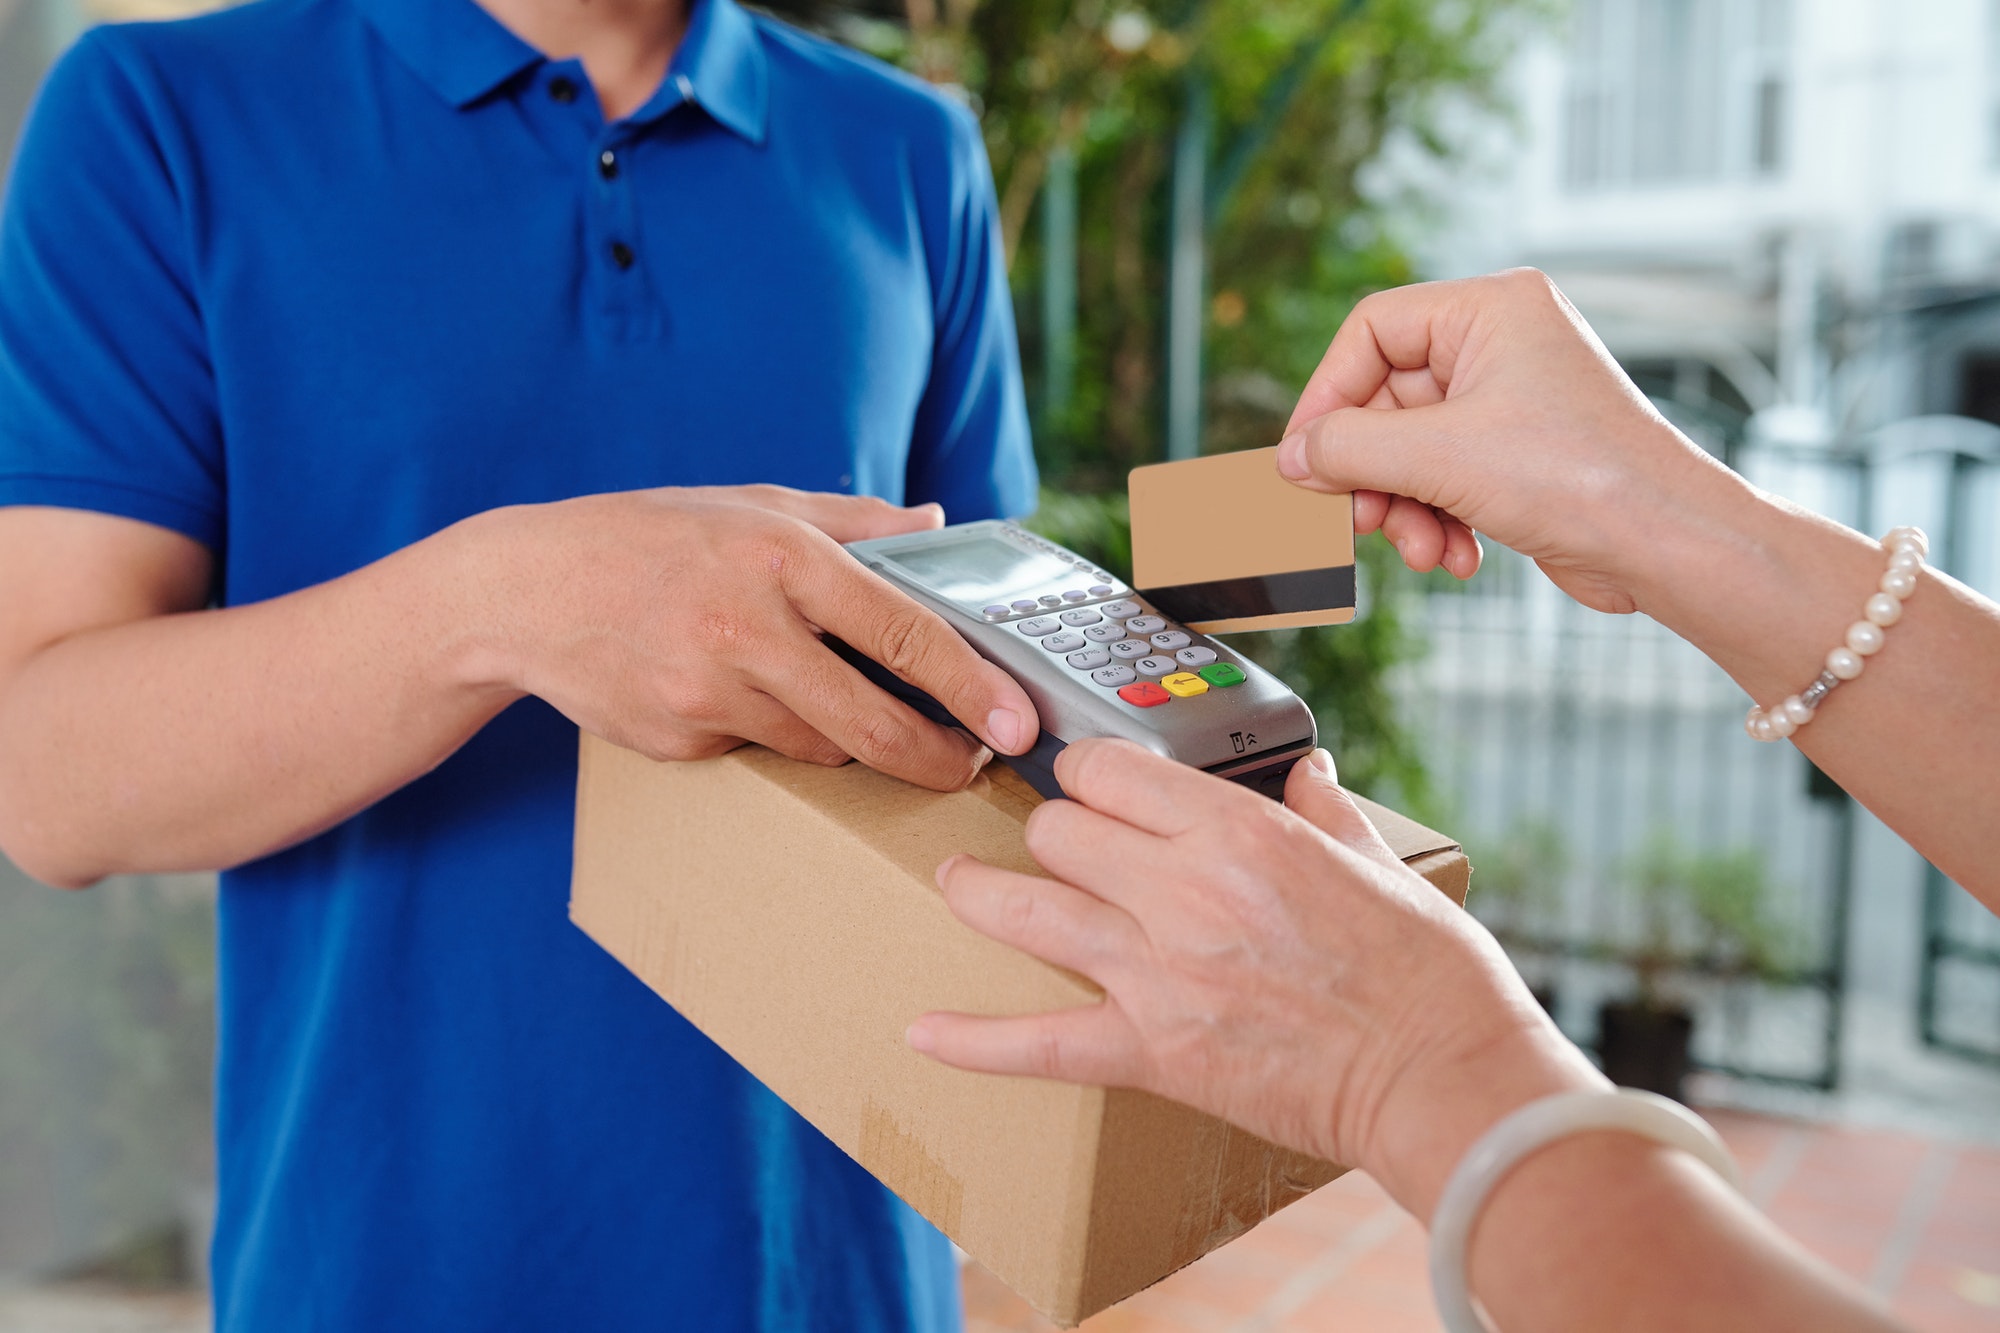 Paying for package delivery